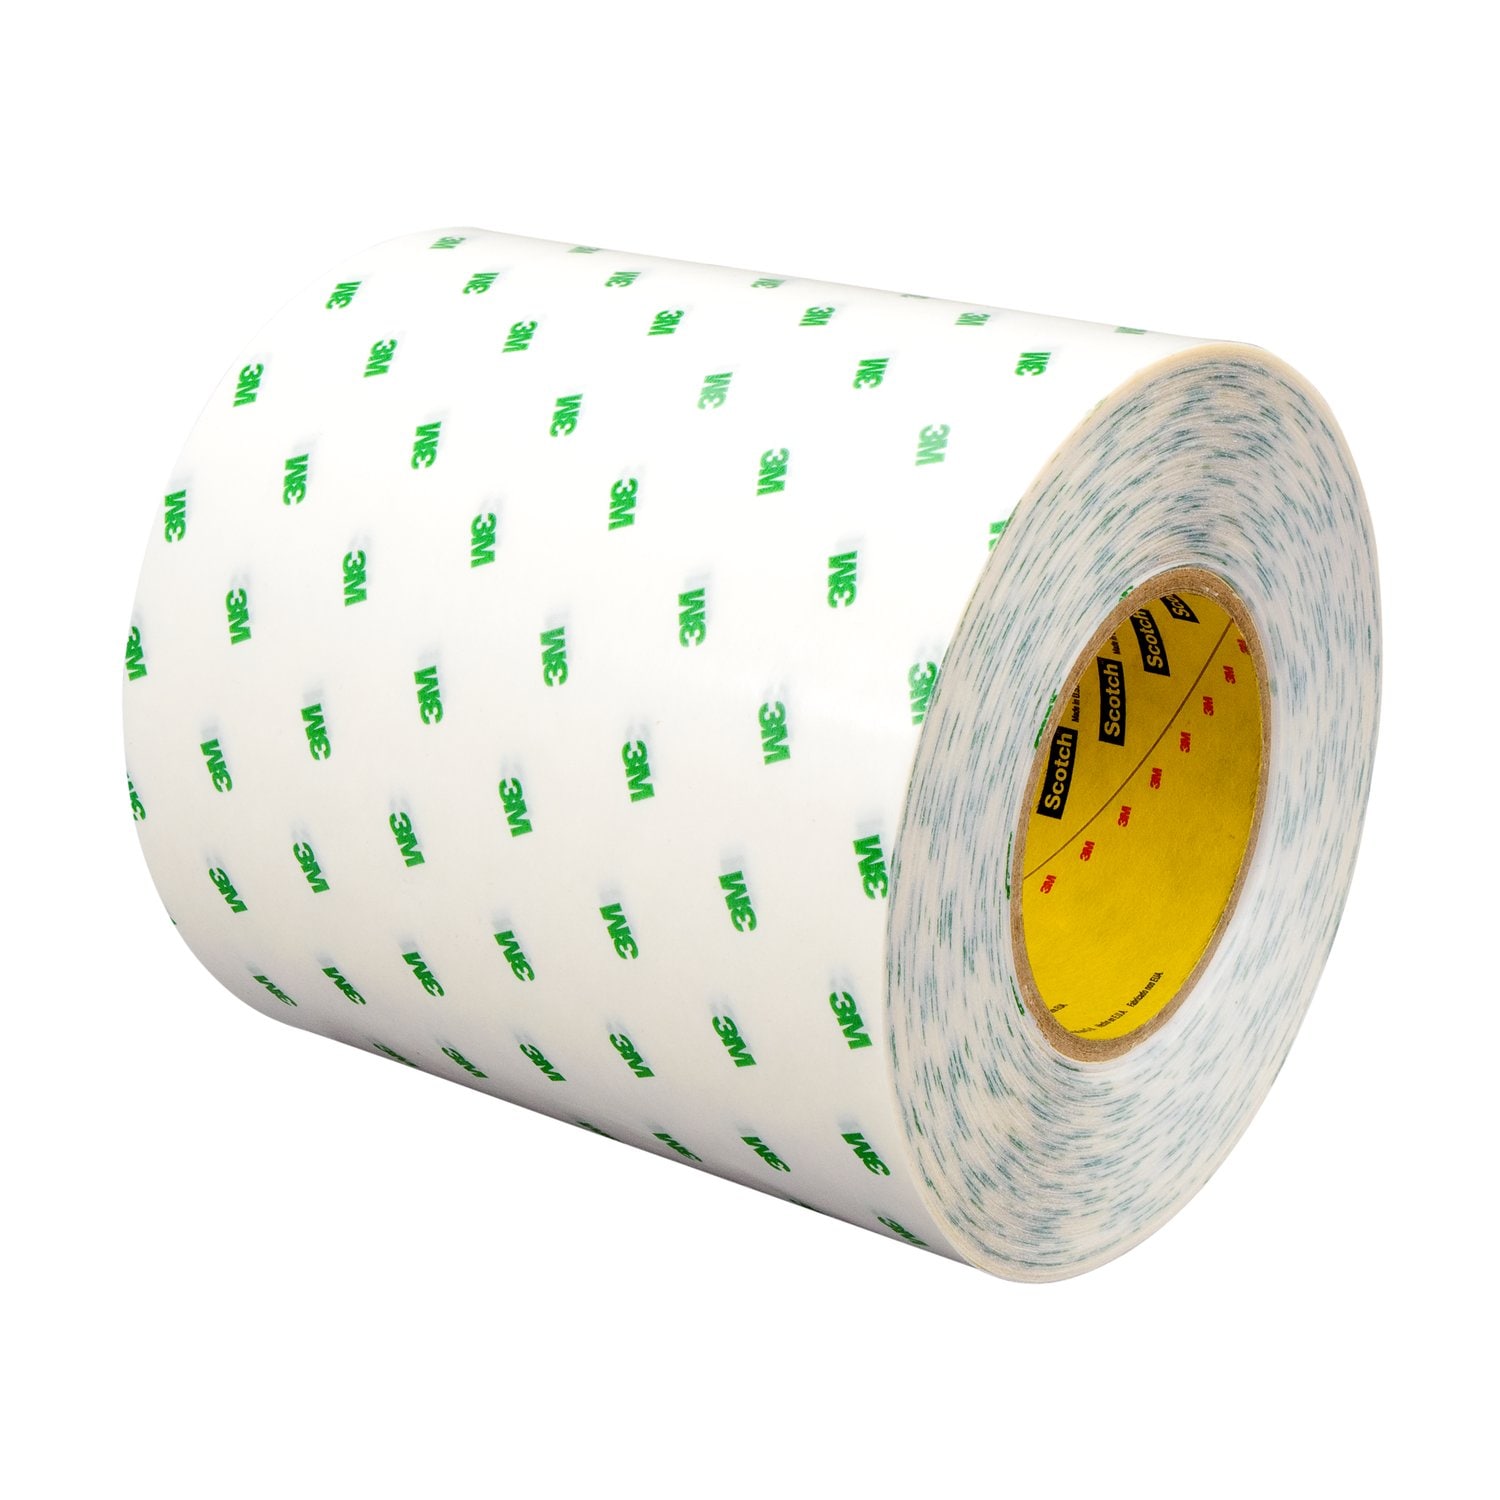 7100073038 - 3M UV Light Detectable Ultra High Temperature Adhesive Transfer Tape
9085UV, Clear, 5 mil, Roll, Config